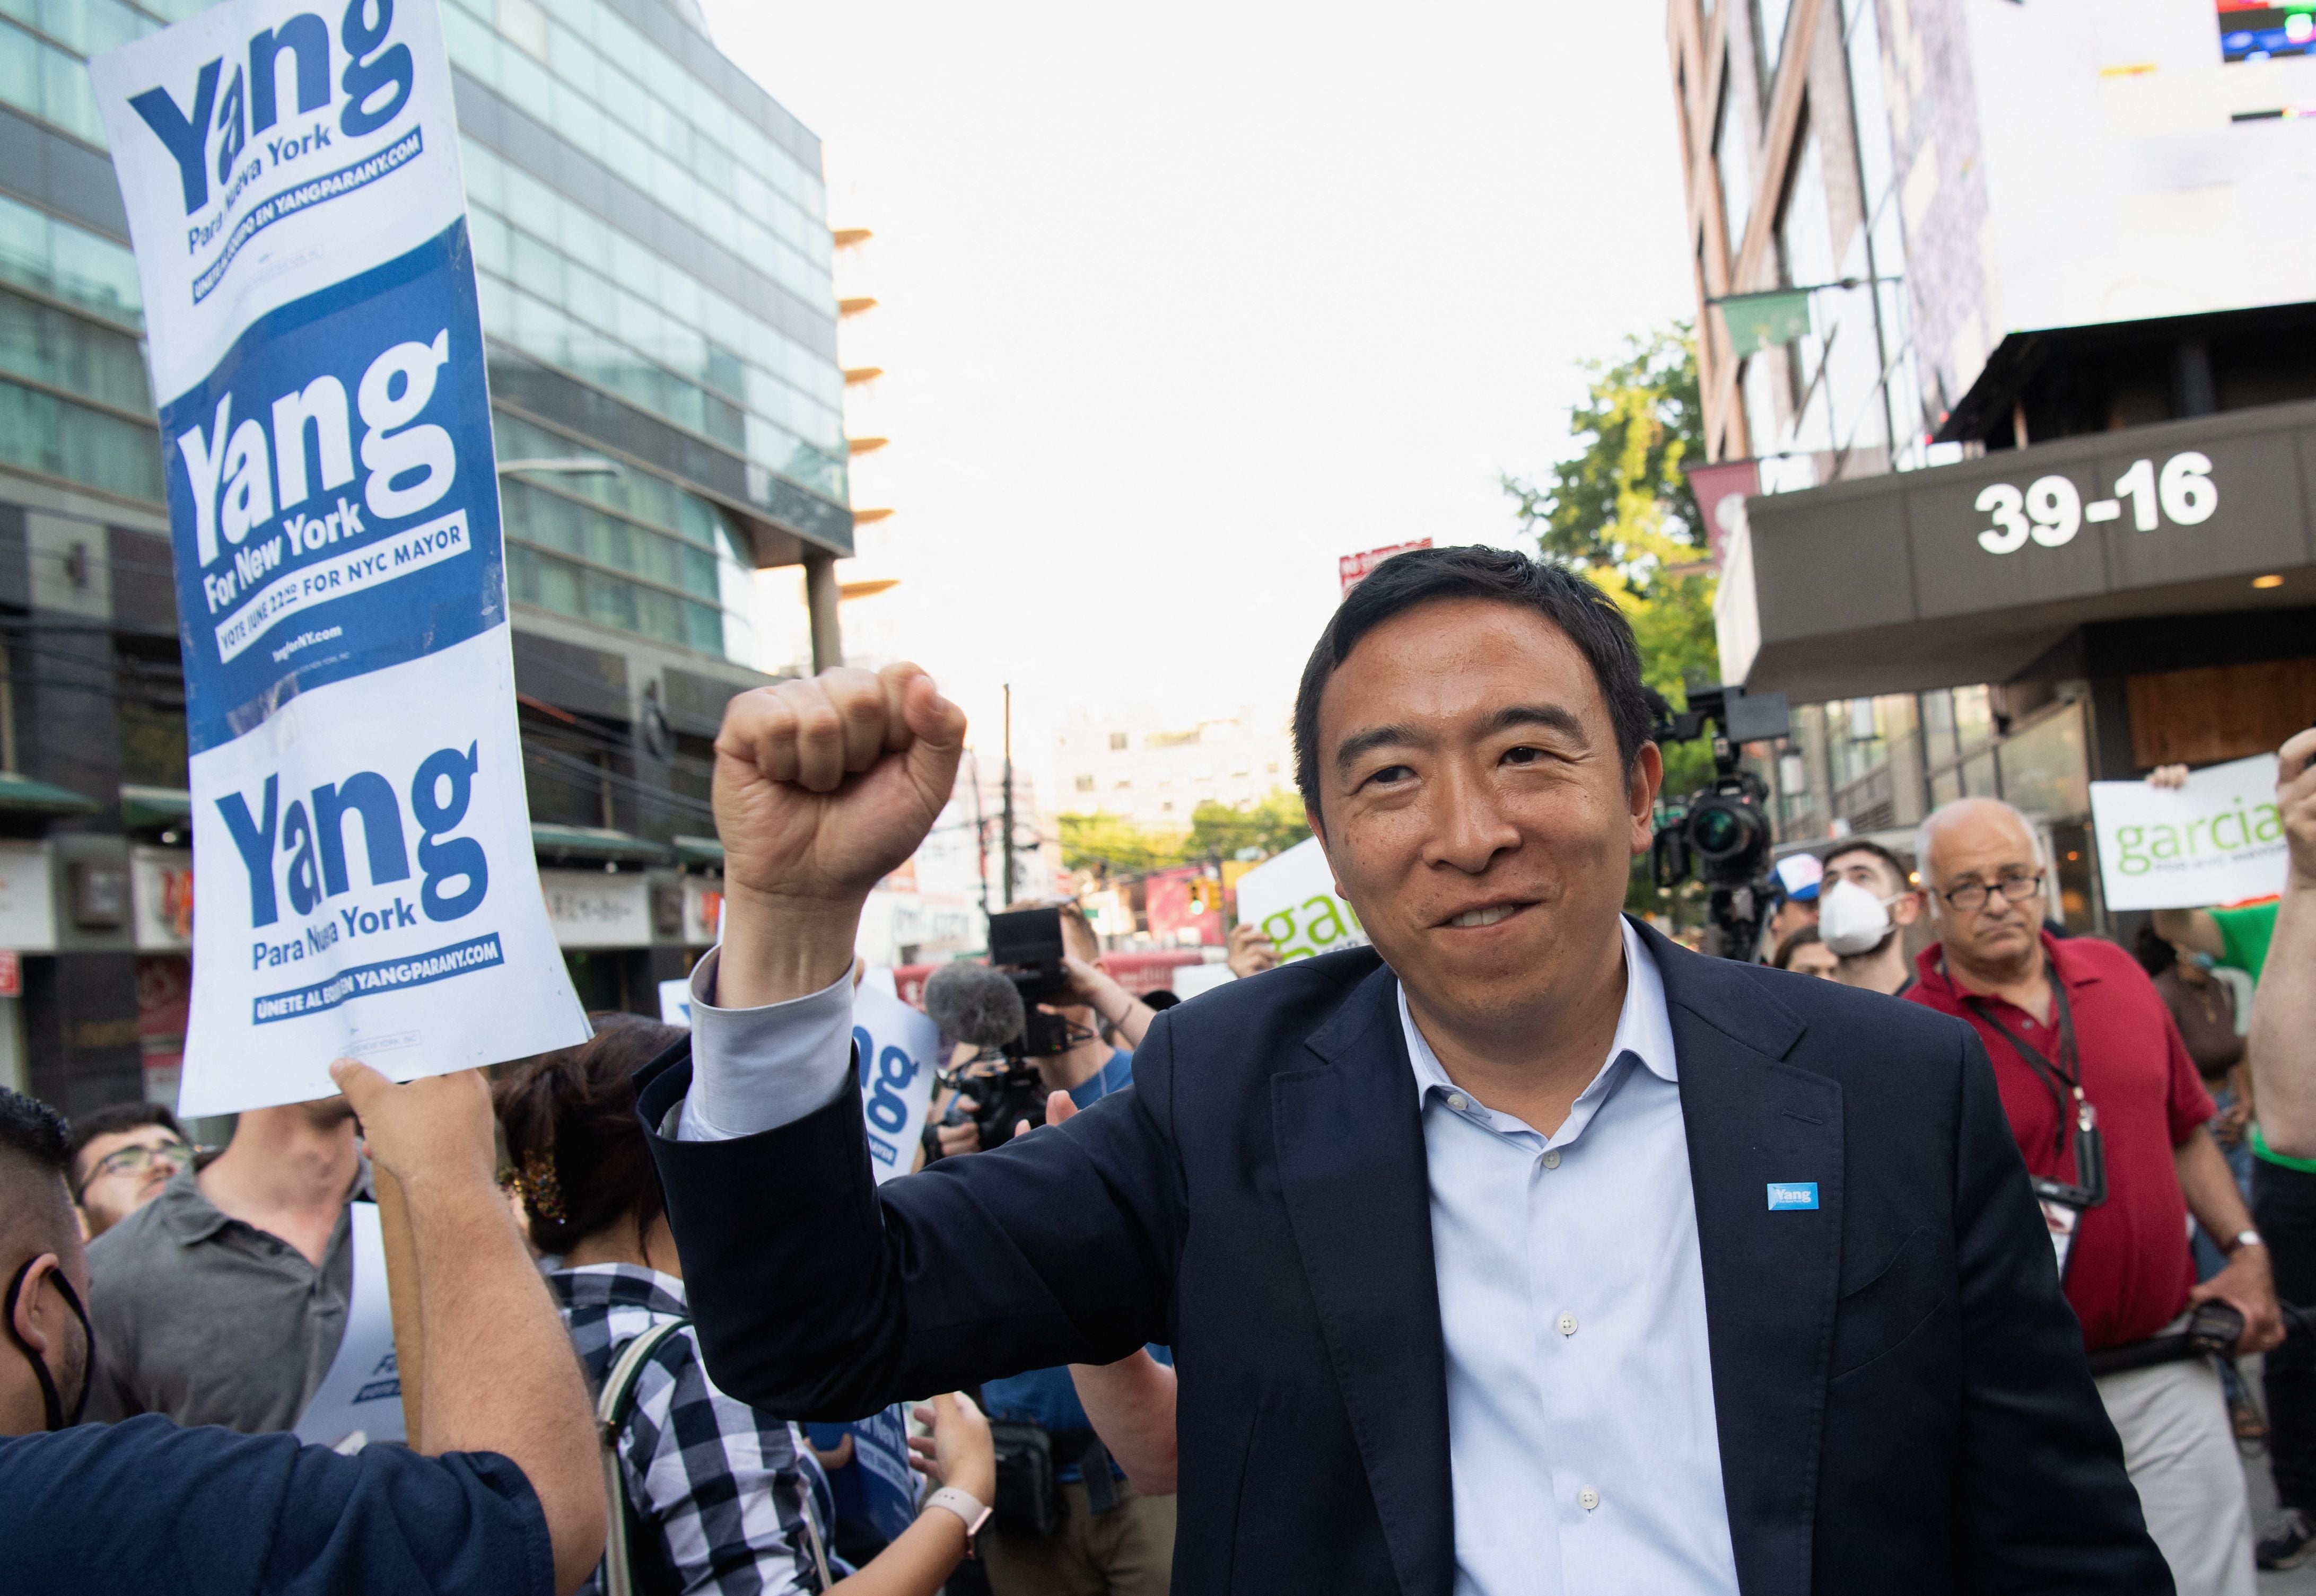 New York City mayoral candidate Andrew Yang on the campaign trail